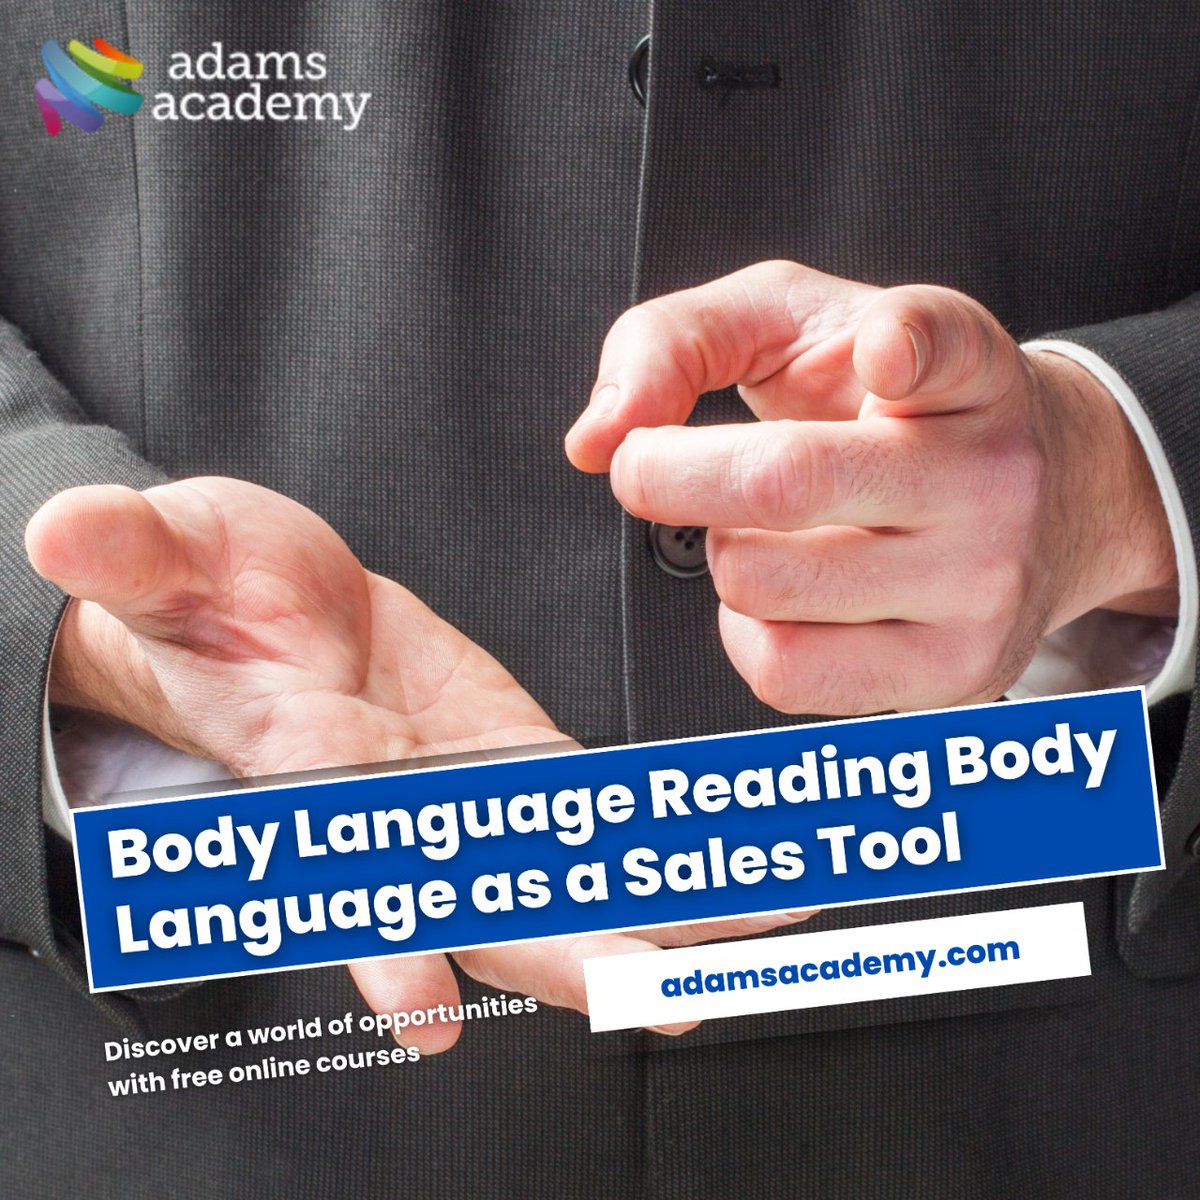 Master the art of non-verbal communication with our 'Body Language as a Sales Tool' course at Adams Academy. Start influencing sales with confidence today!

#BodyLanguage #SalesSkills #NonverbalCommunication #AdamsAcademy #SalesTraining